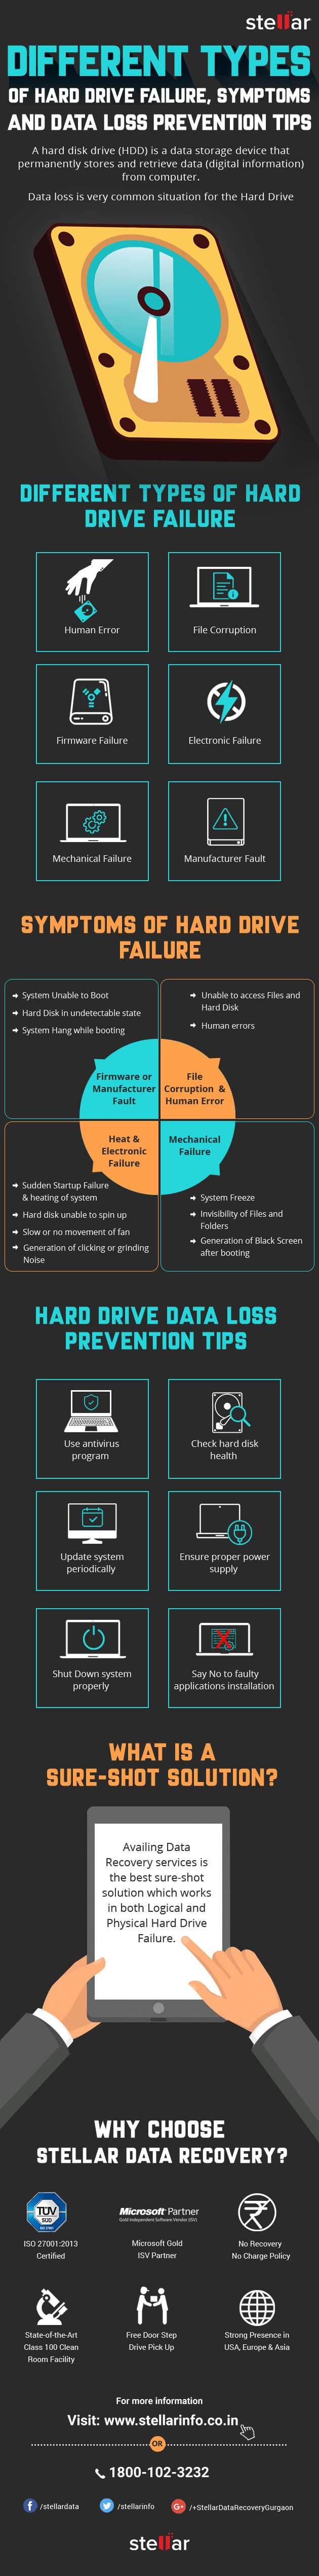 Types of Hard Drive Failure and Data Loss Prevention Tips